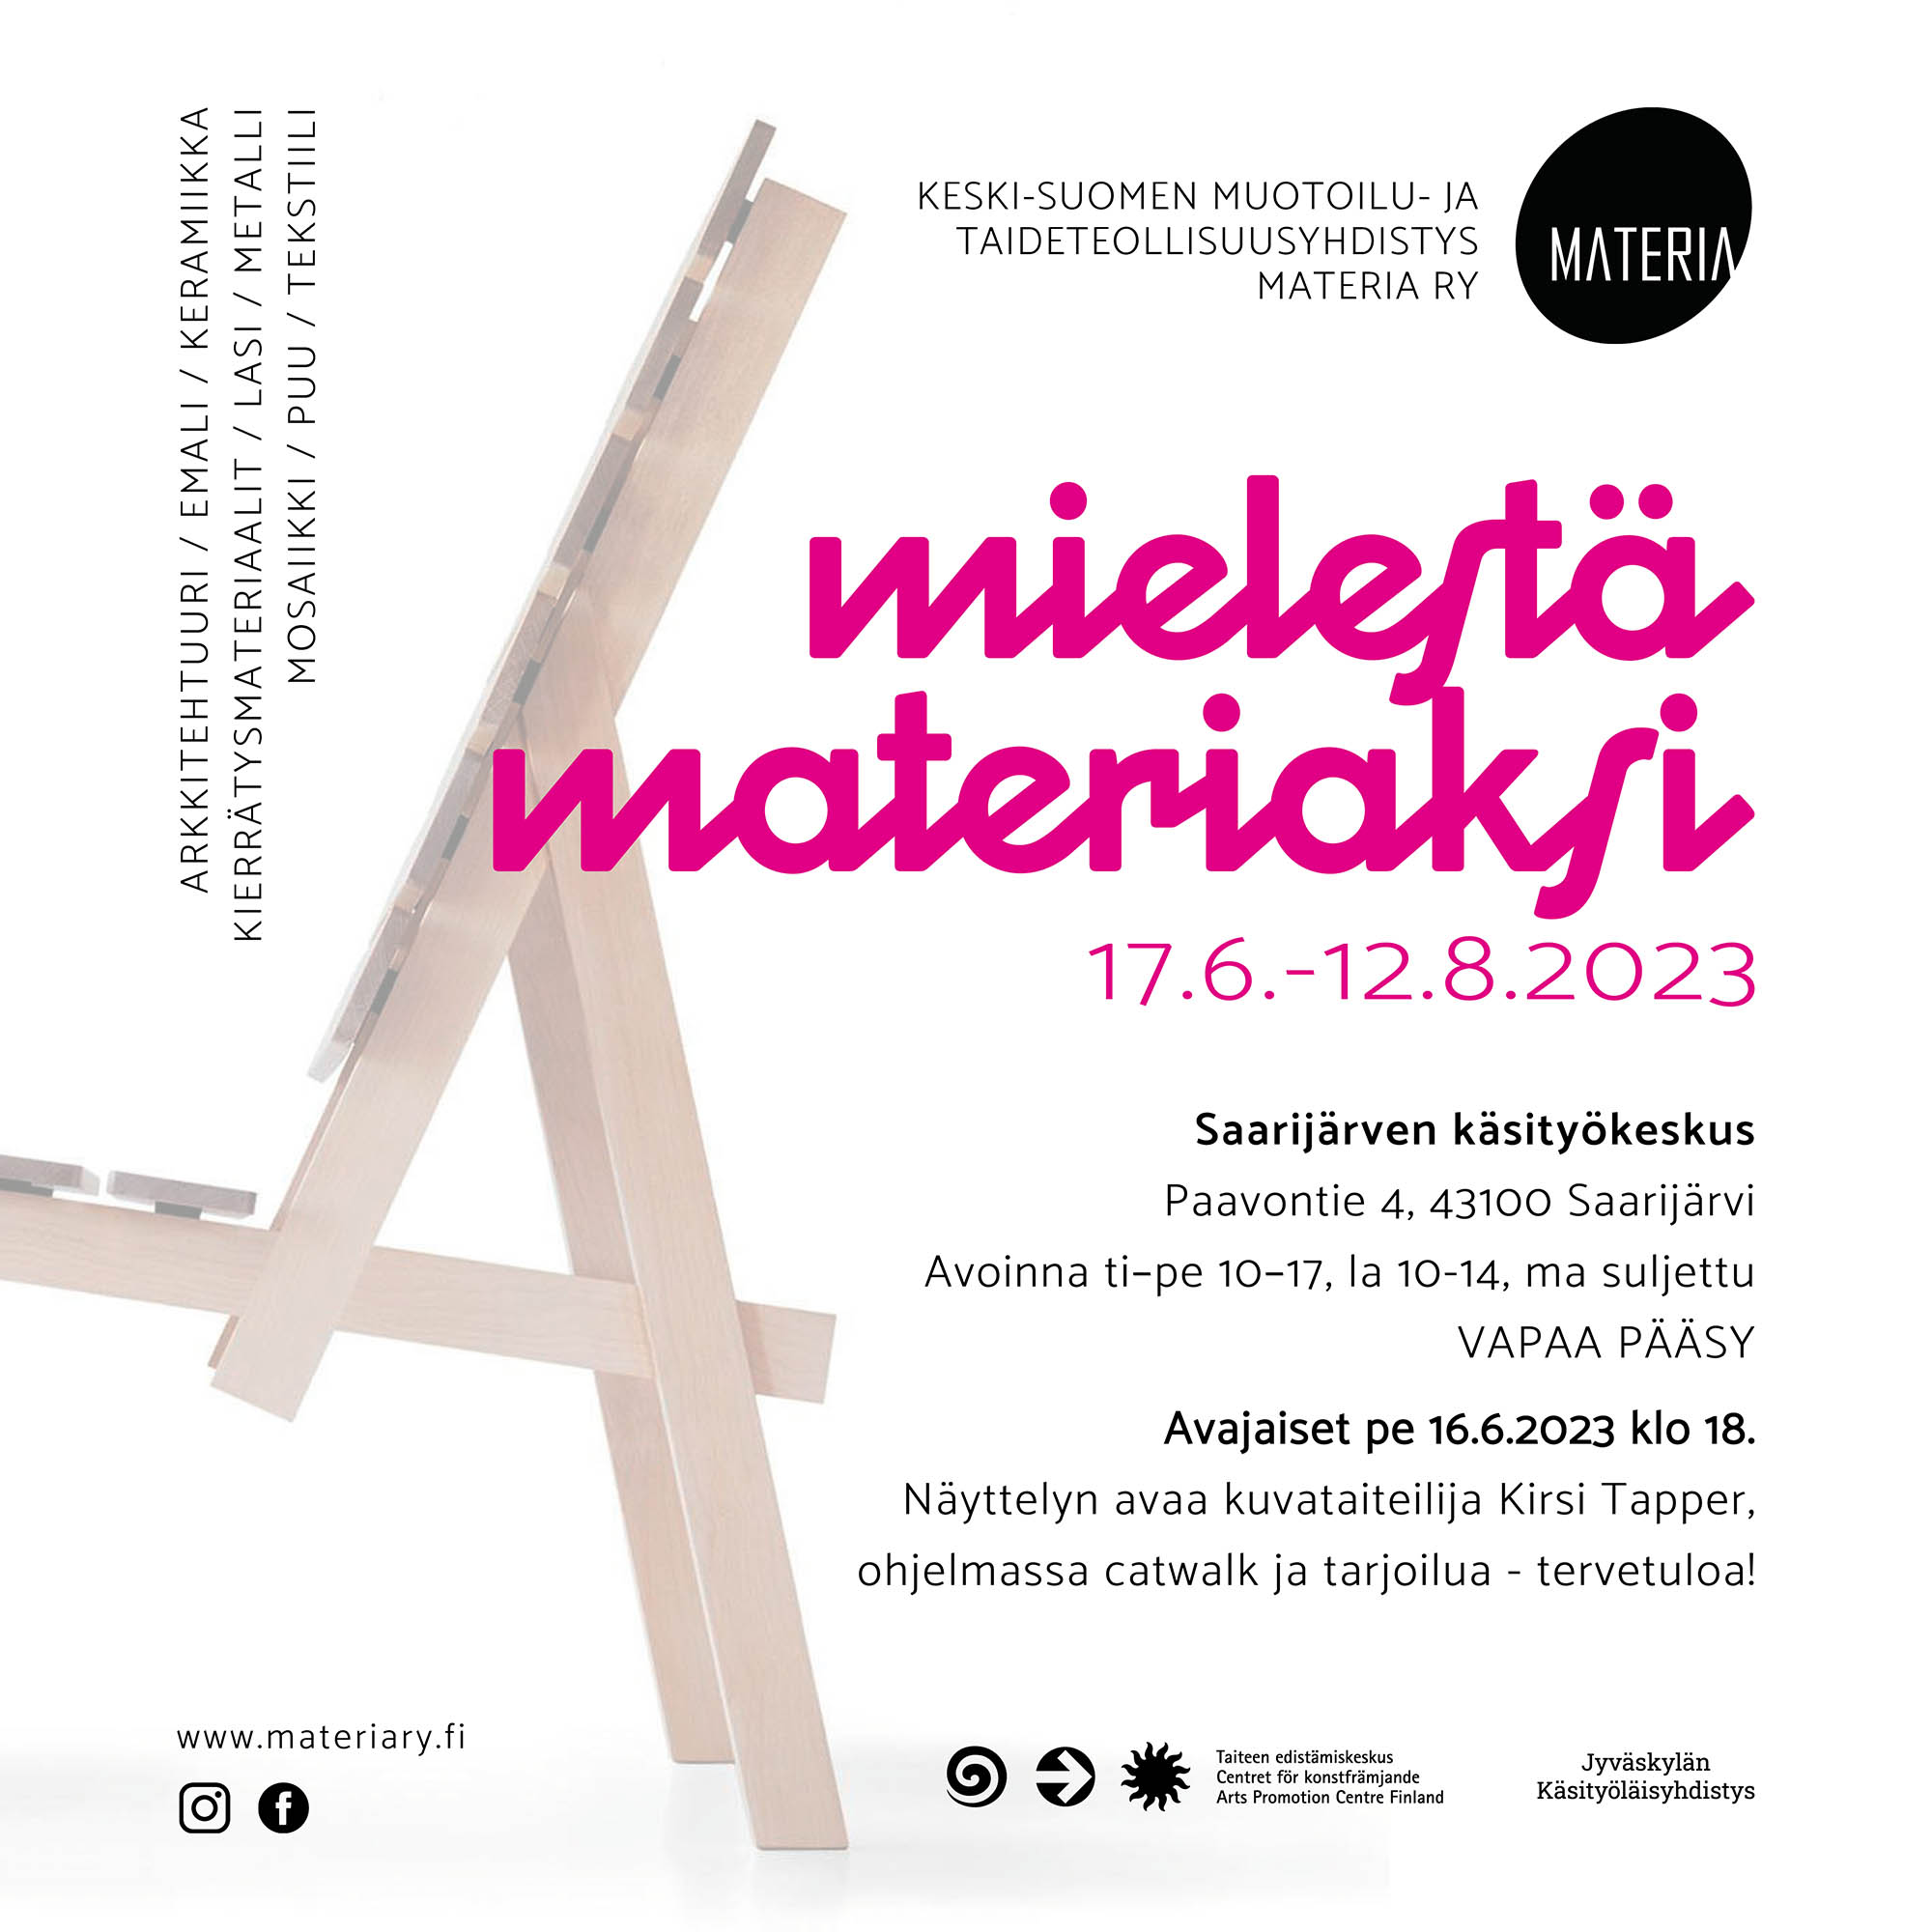 You are currently viewing Mielestä materiaksi 17.6.-12.8.2023